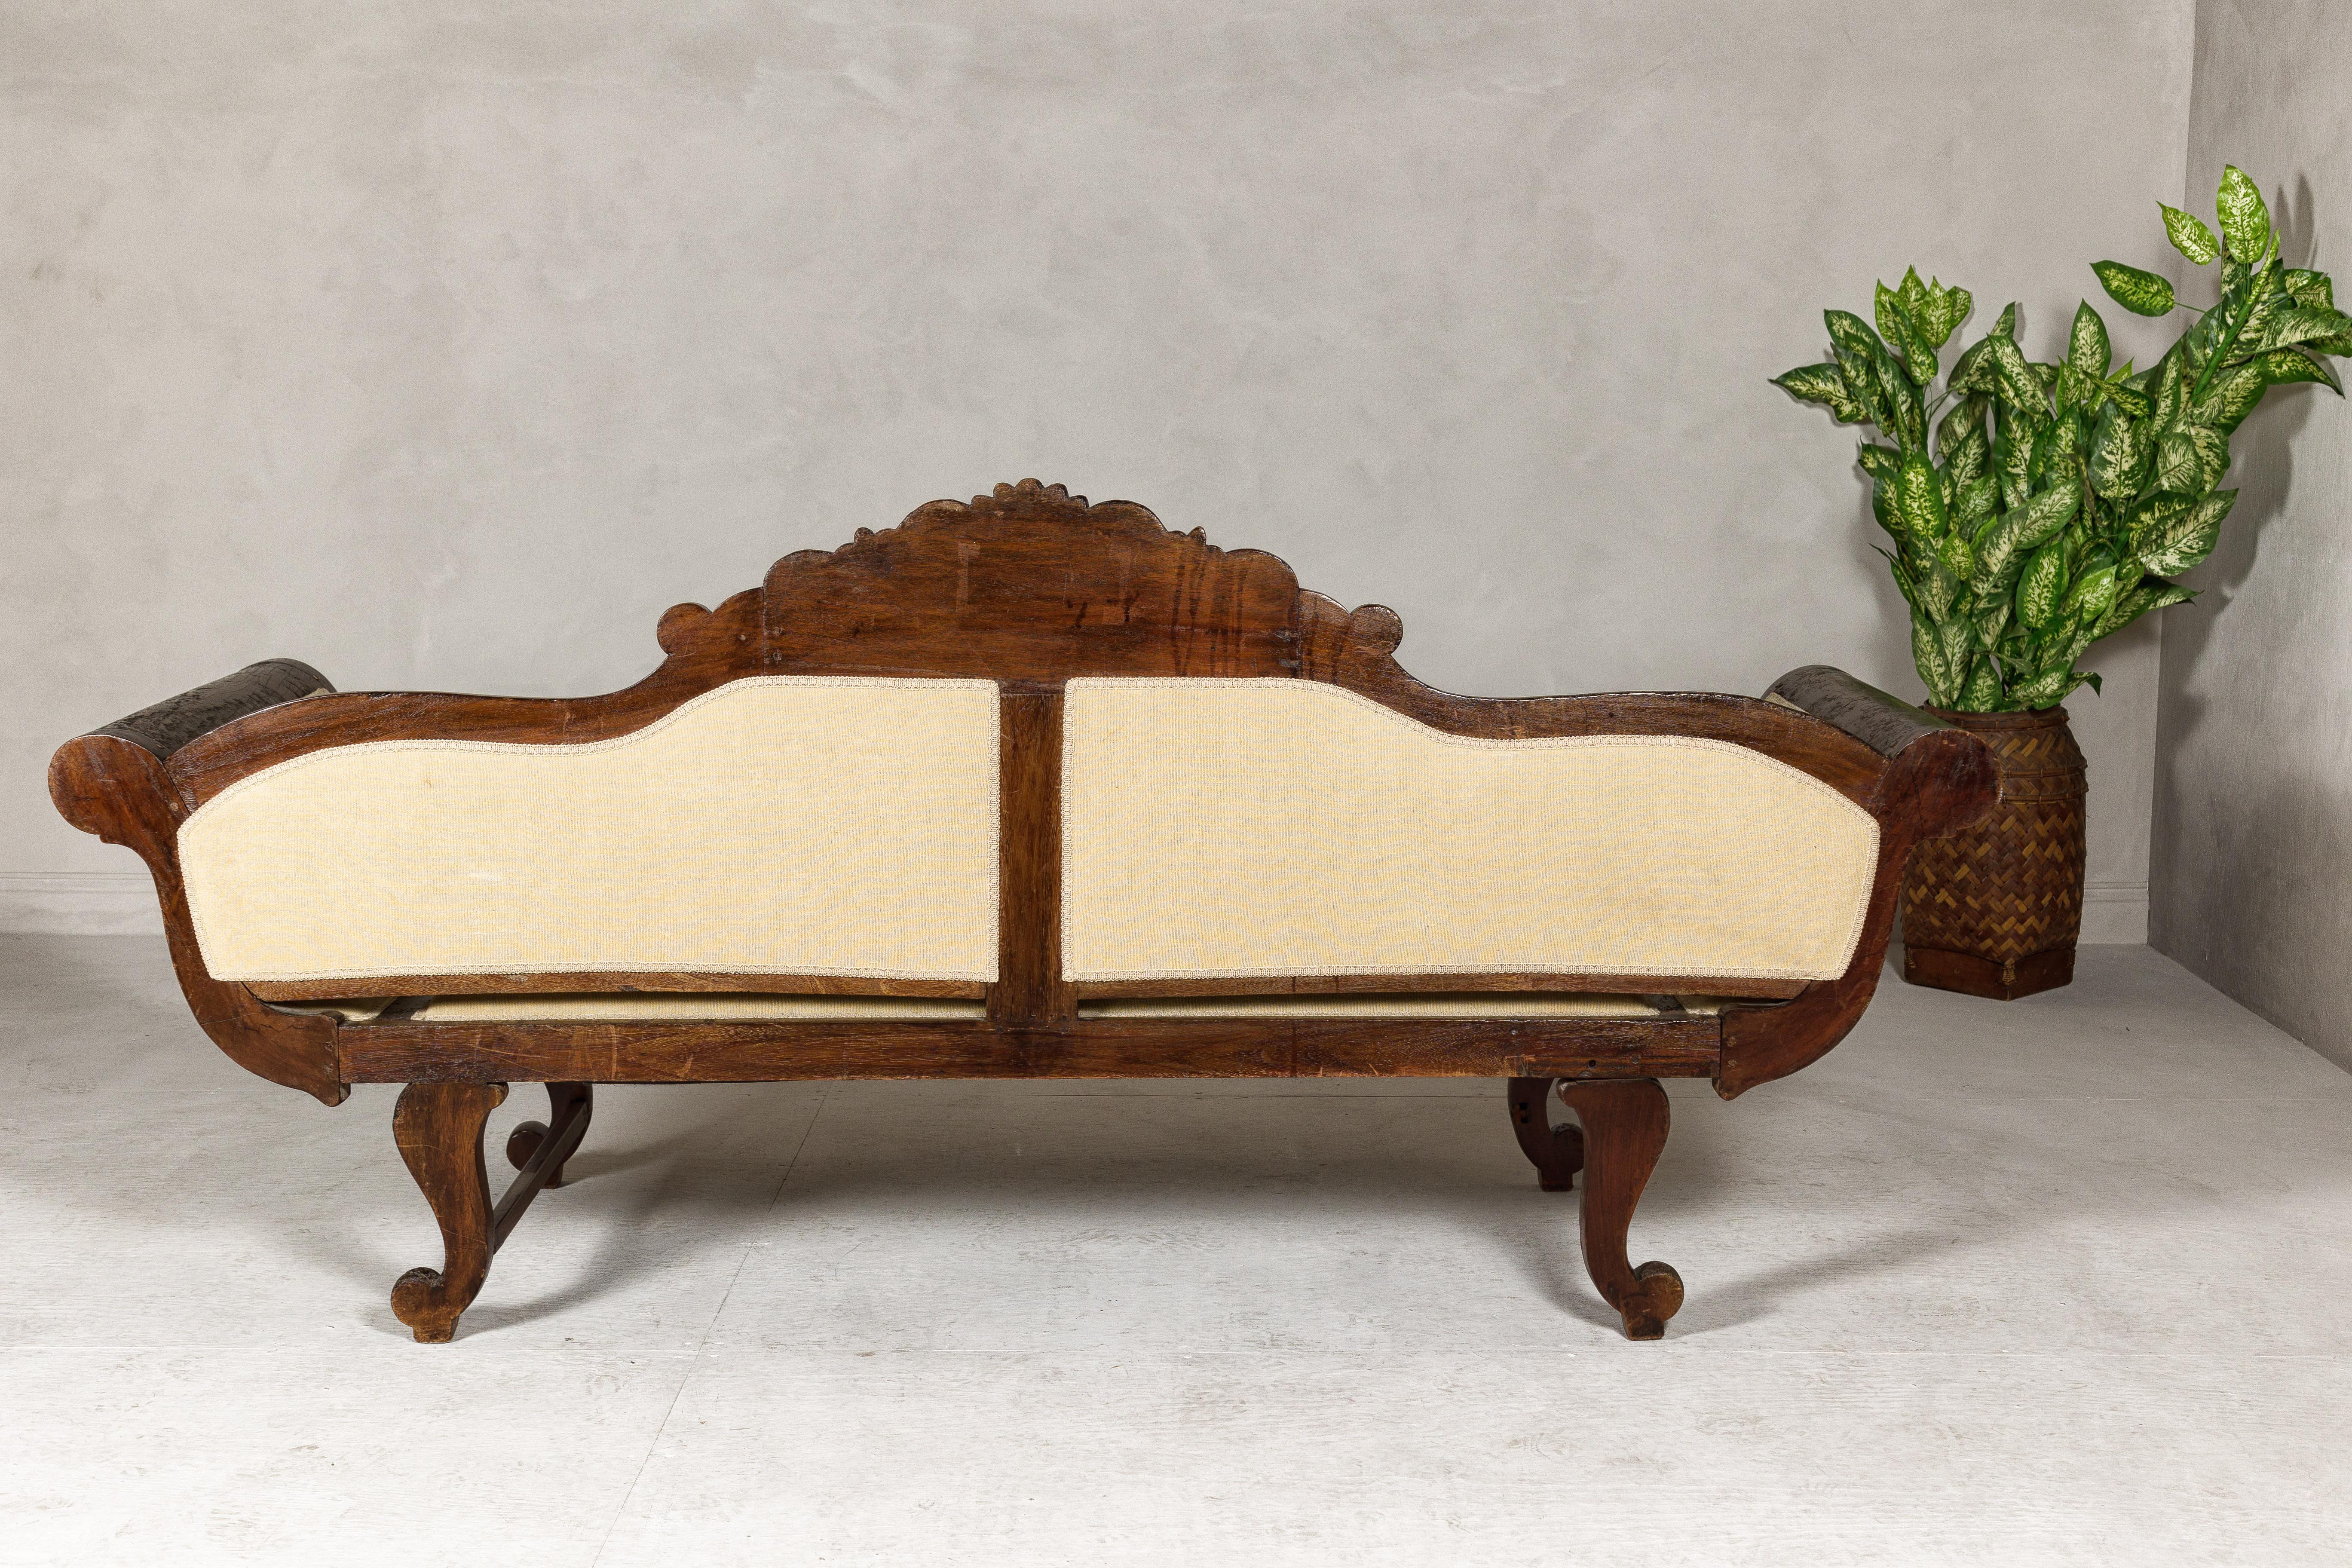 Dutch Colonial Wooden Settee with Carved Crest and Out-Scrolling Arms For Sale 8